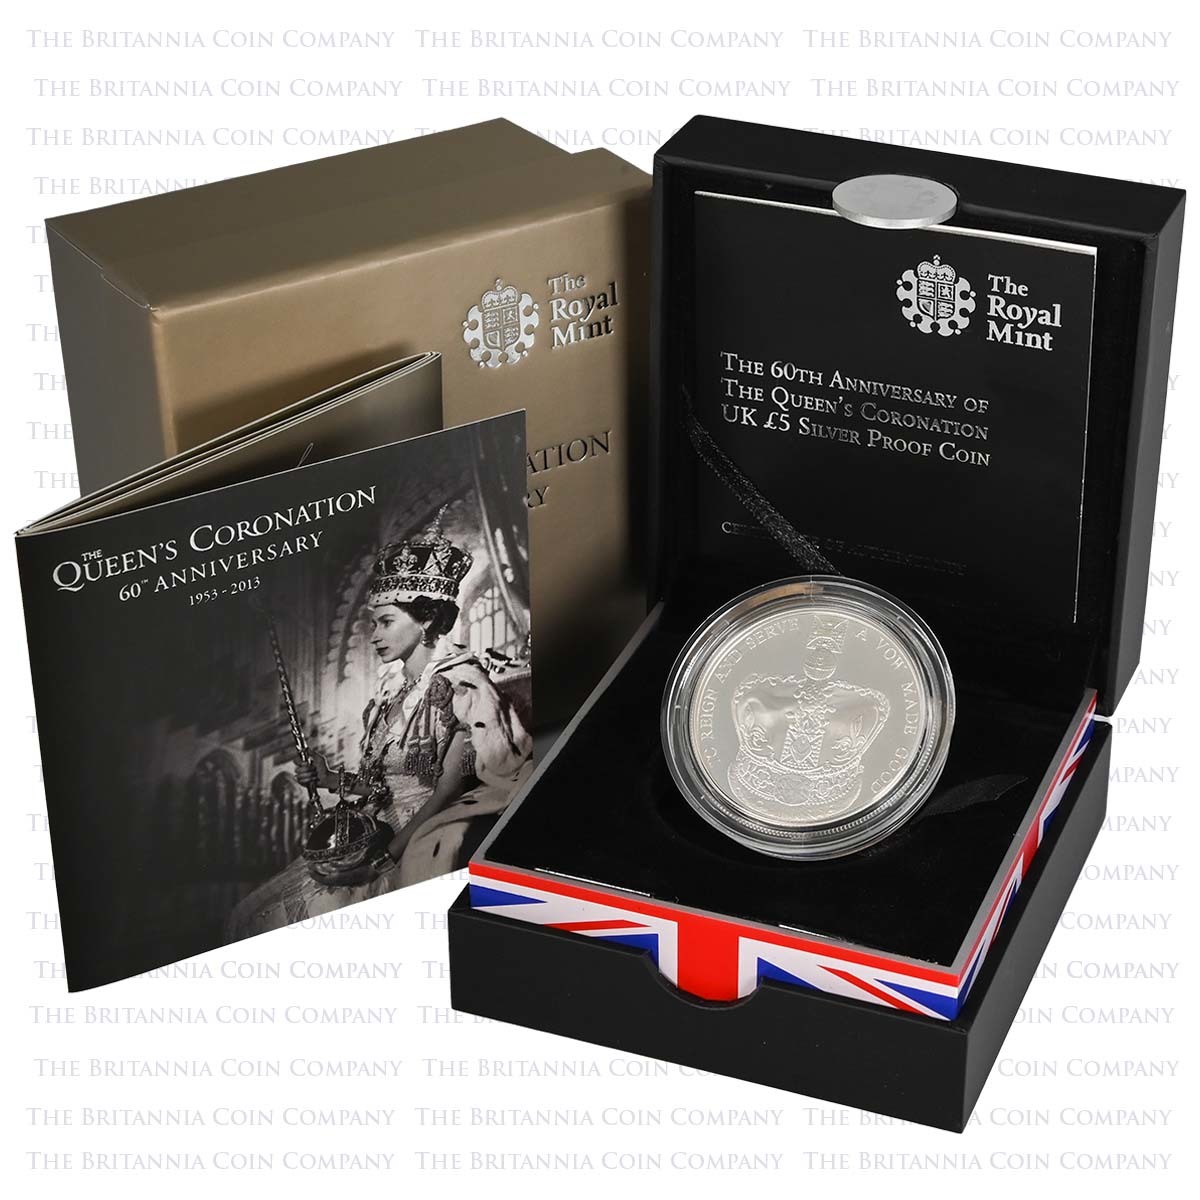 2013 Queen's Coronation 60th Anniversary Five Pound Crown Silver Proof Coin Boxed